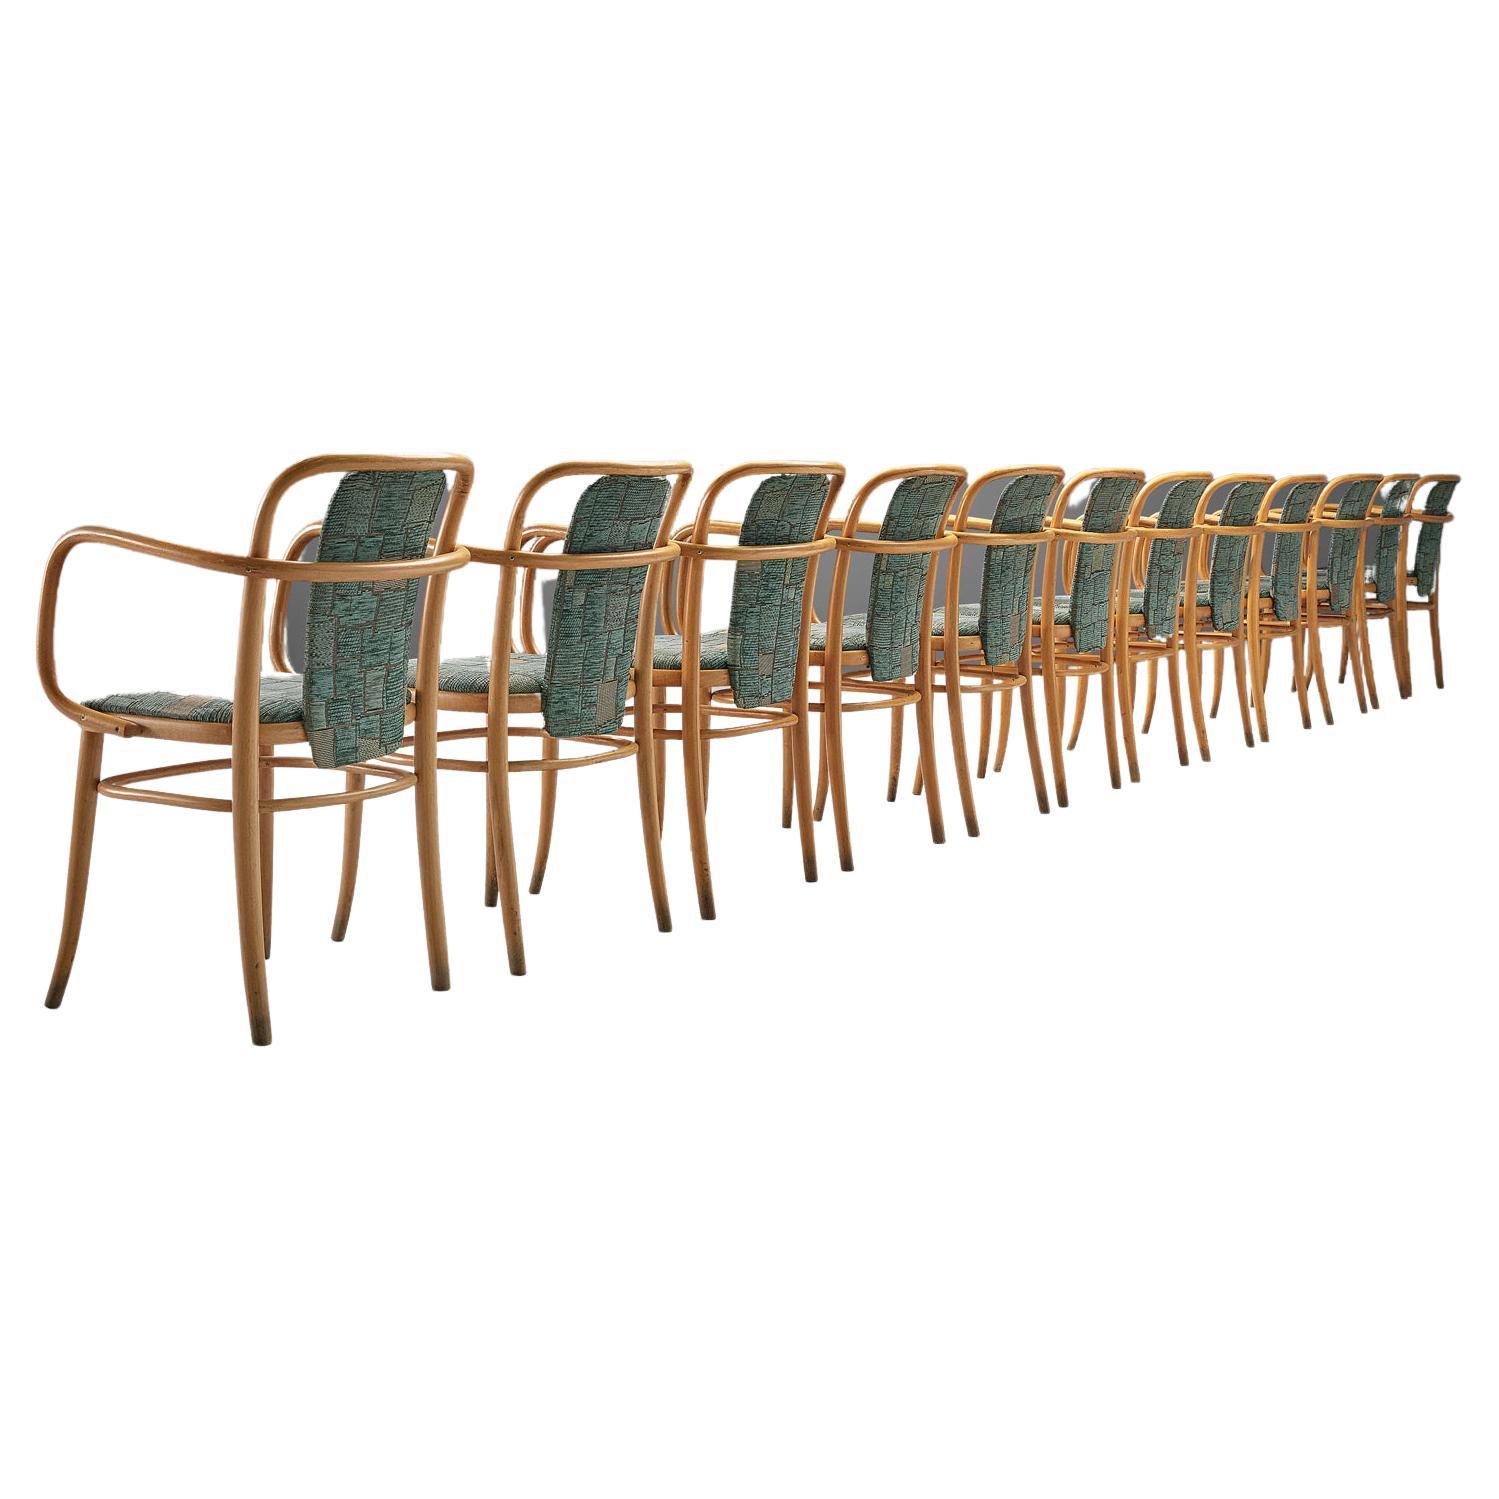 Large Set of Twelve Bentwood Armchairs in Green Upholstery